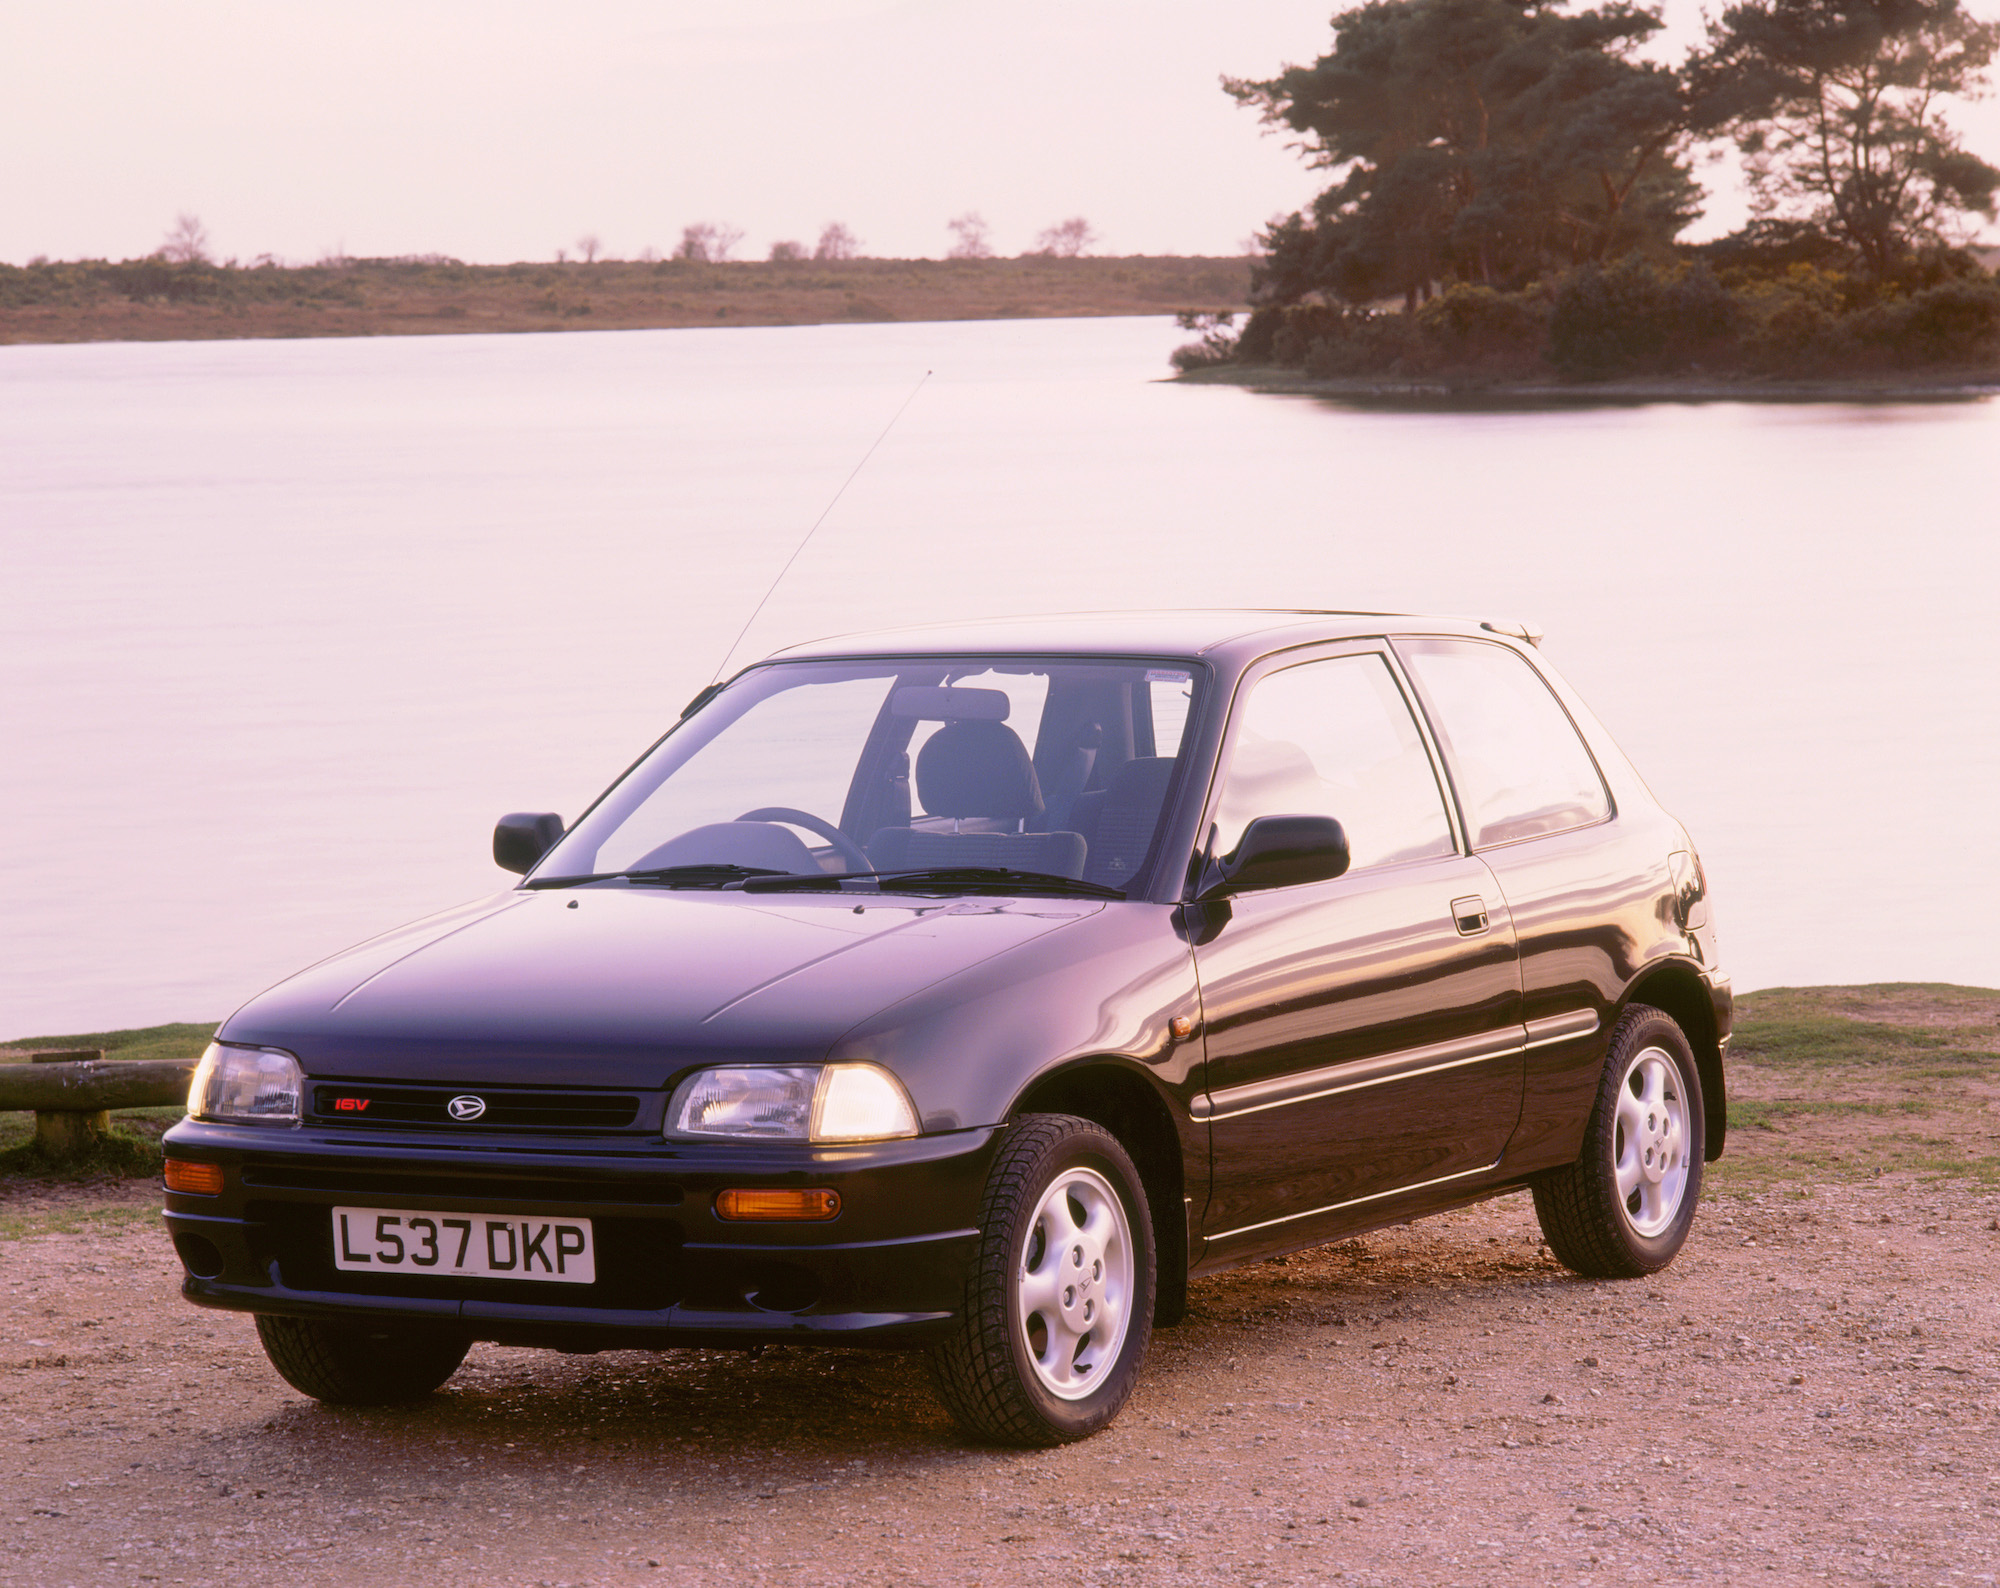 A dark-colored 1994 Daihatsu Charade GTI hatchback parked by a lake